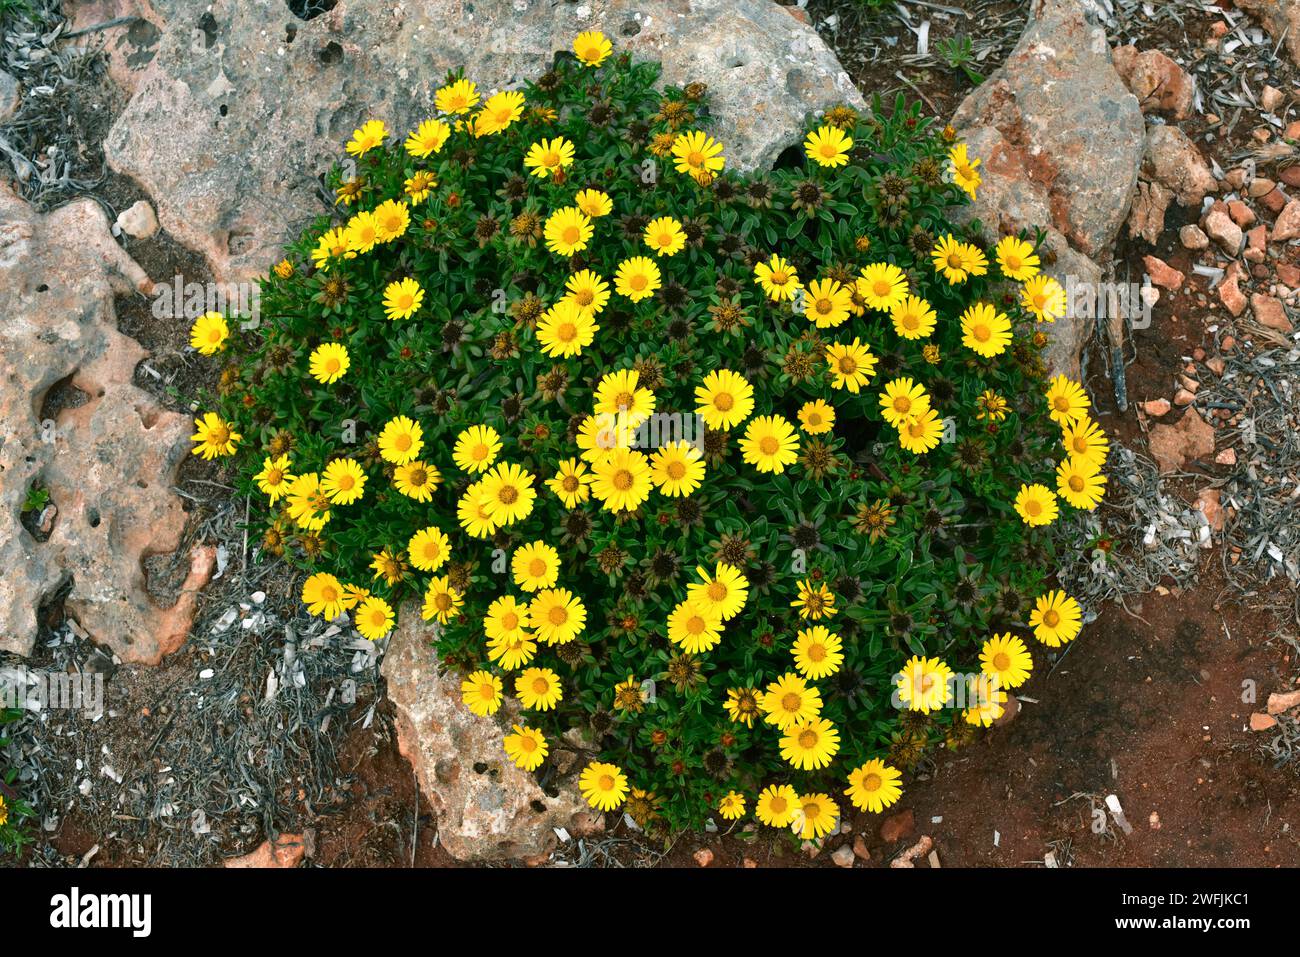 Gold coin daisy (Asteriscus maritimus or Pallenis maritima) is a perennial herb native to west Mediterranean coasts, Canary Islands and Greece. This p Stock Photo